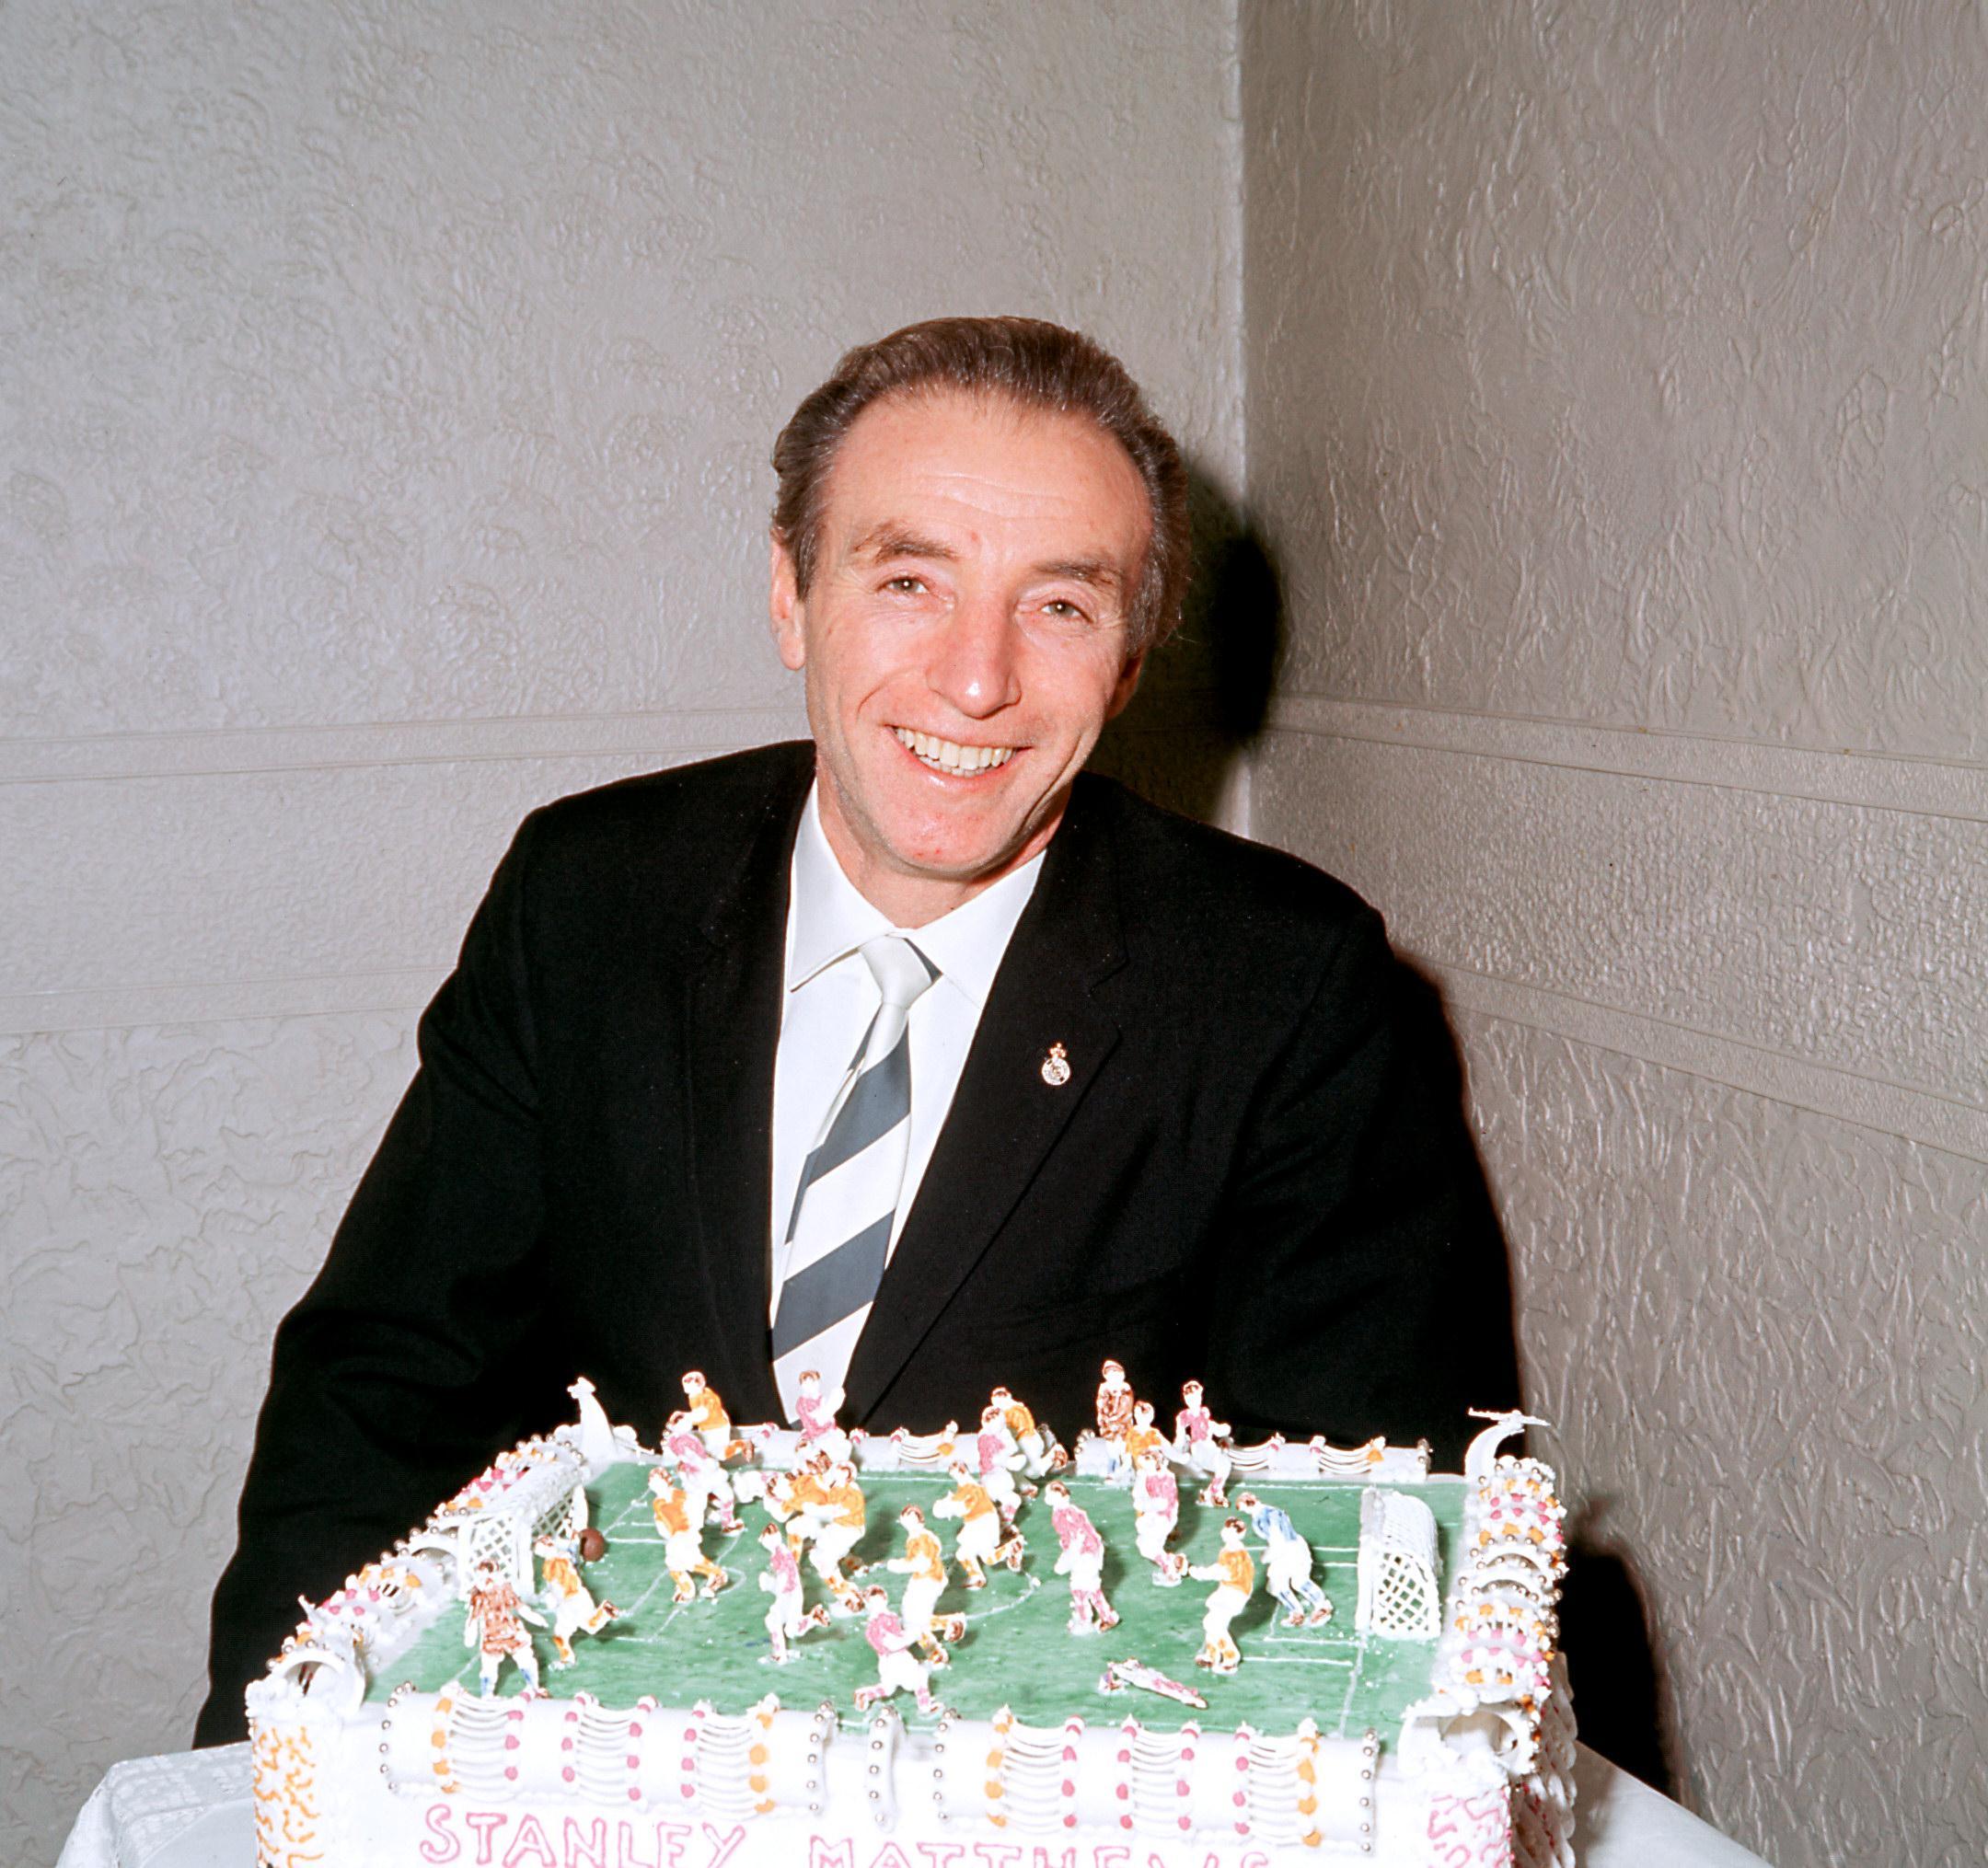 Stanley Matthews with his 50th birthday cake